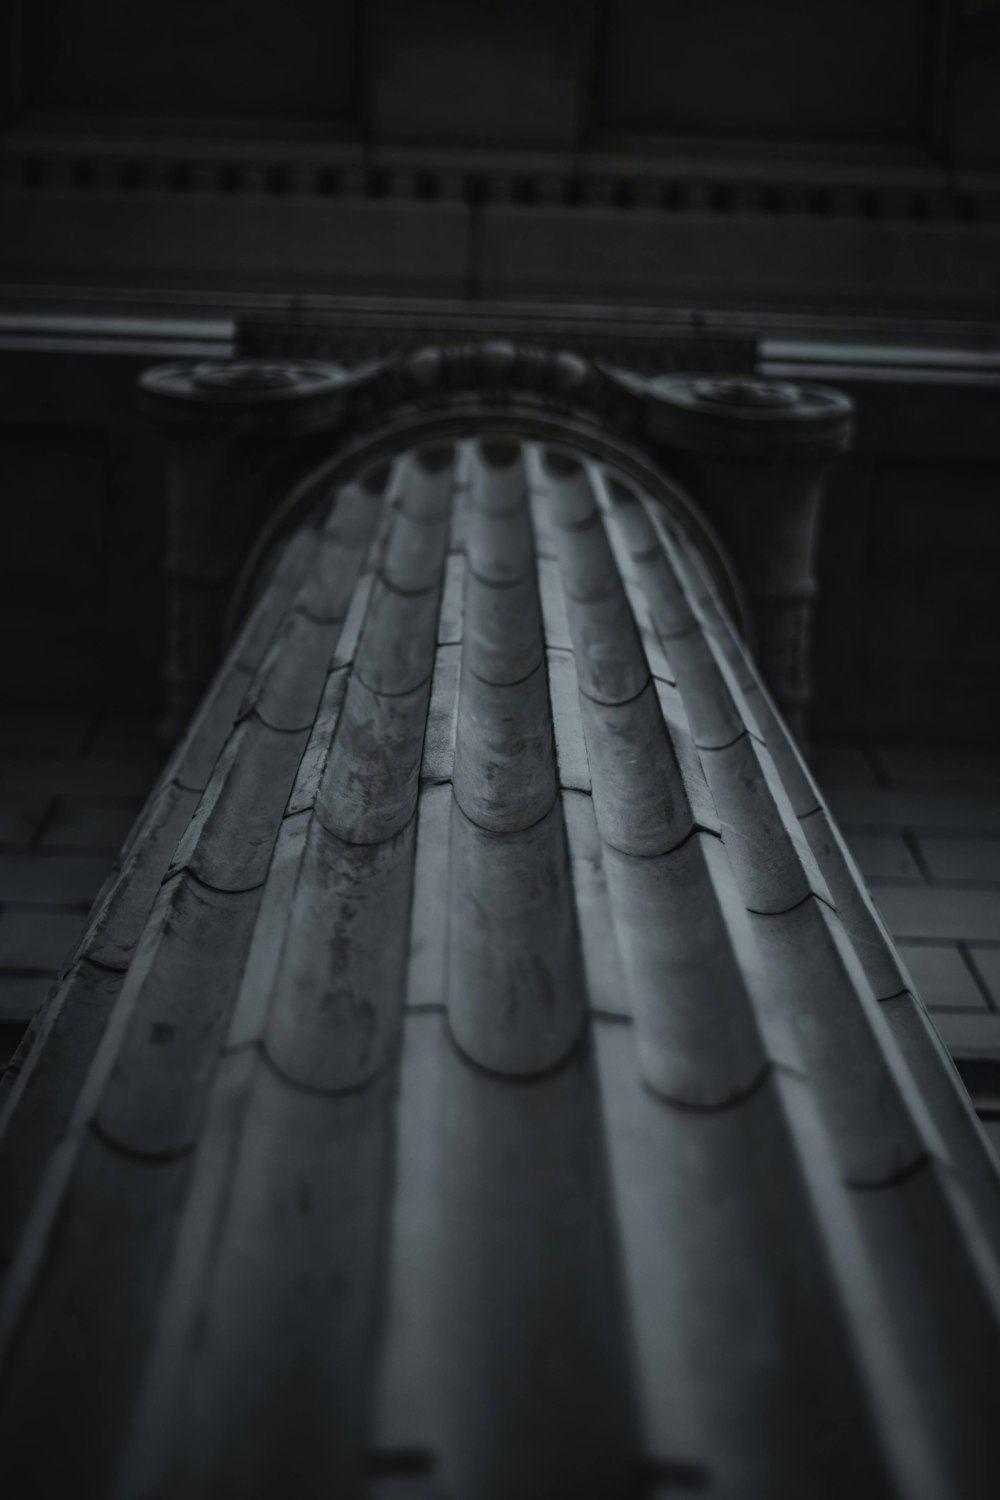 a black and white photo of a roof